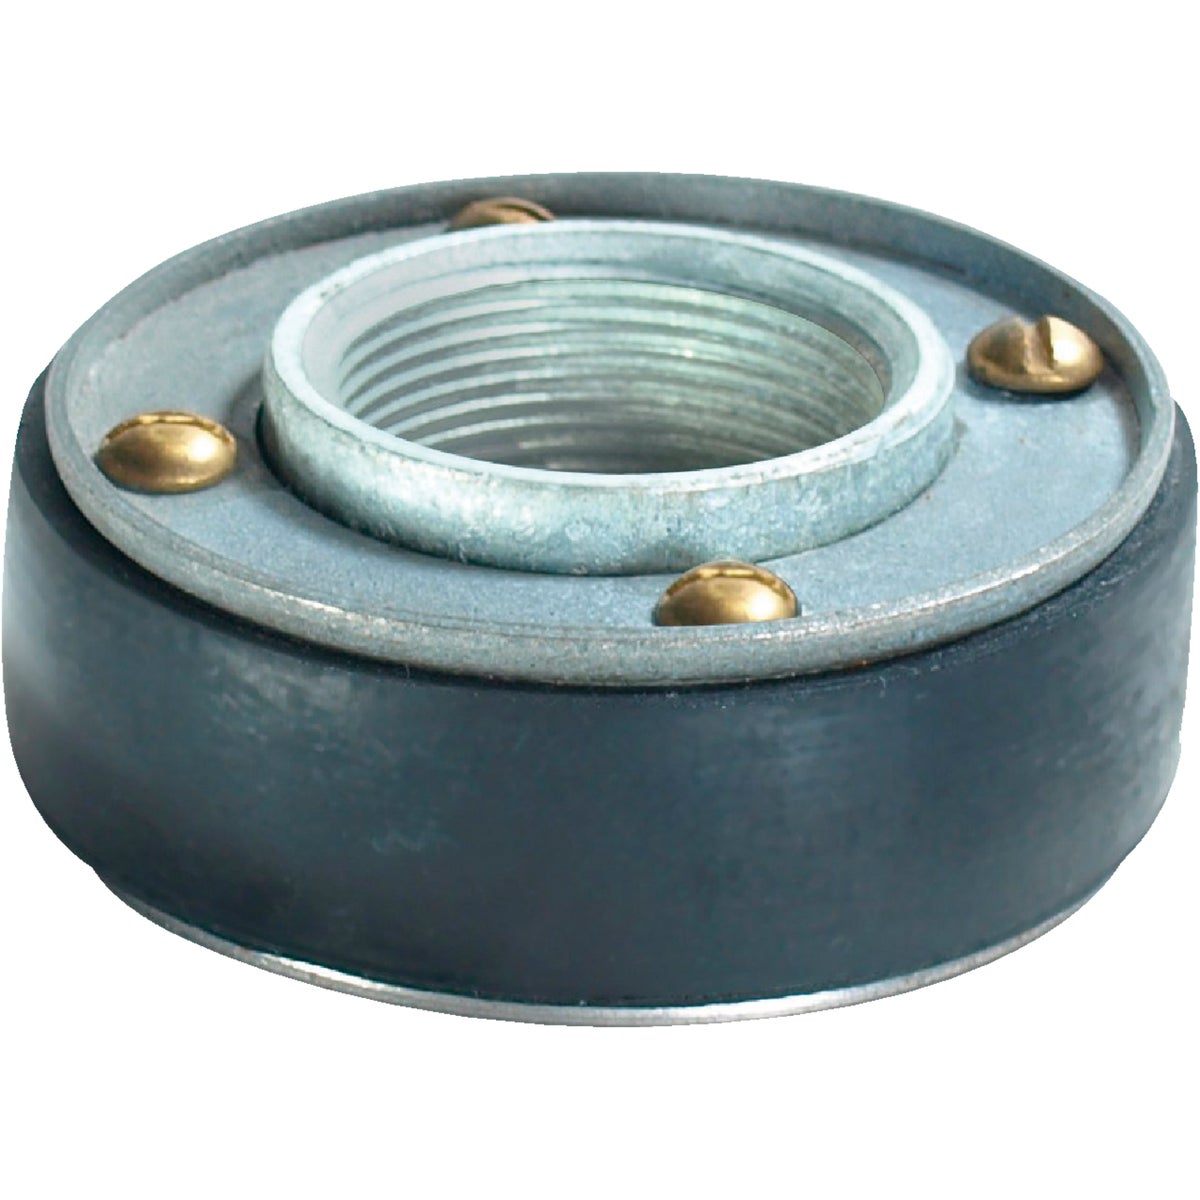 Flood-Guard 4 In. Rubber Stand Pipe Check Valve